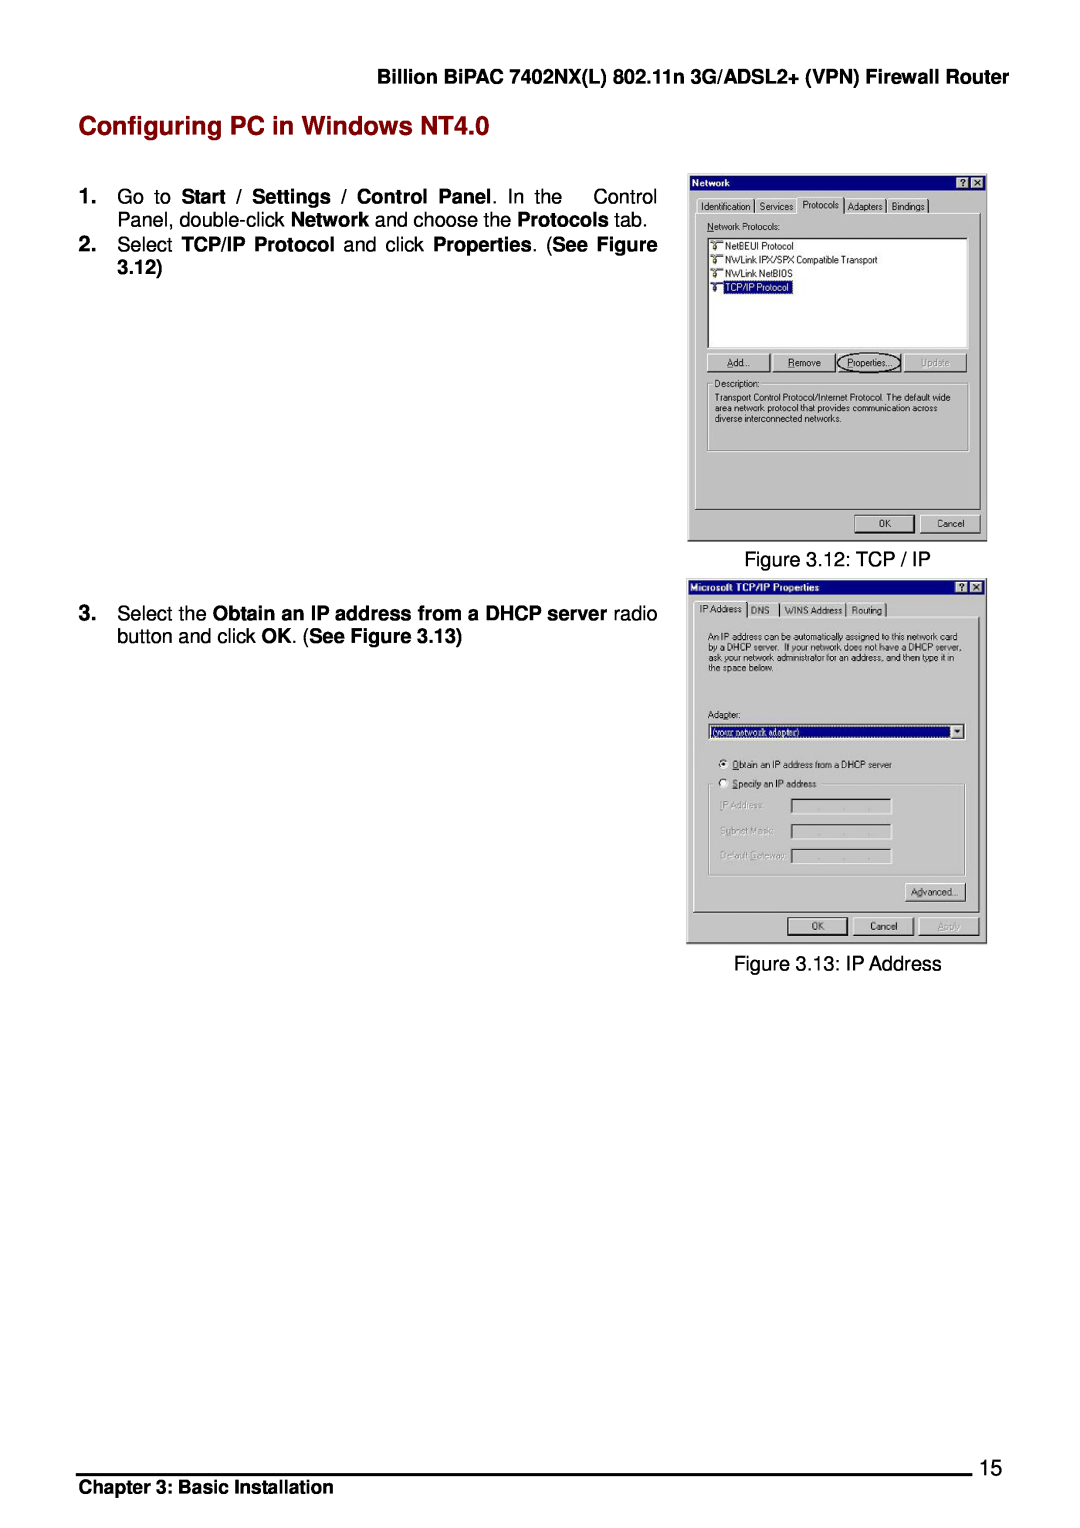 Billion Electric Company 7402NX Configuring PC in Windows NT4.0, Select TCP/IP Protocol and click Properties. See Figure 